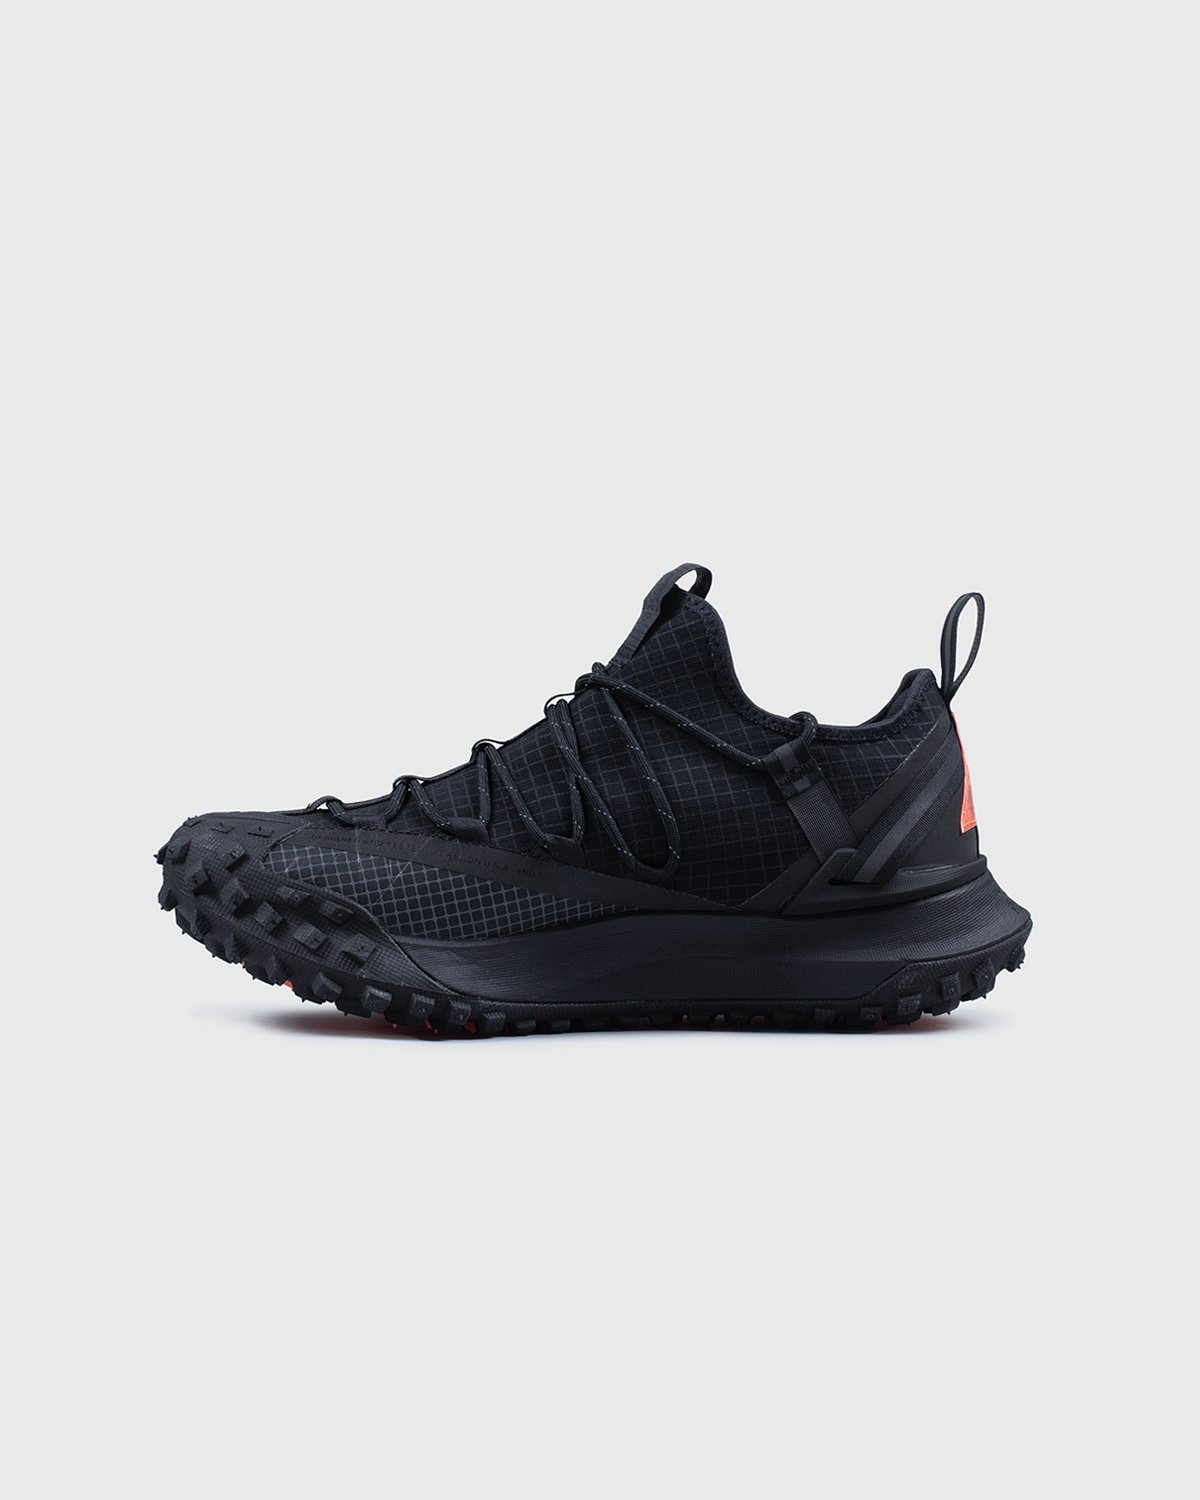 Nike ACG - Mountain Fly Low Anthracite - Footwear - Black - Image 4